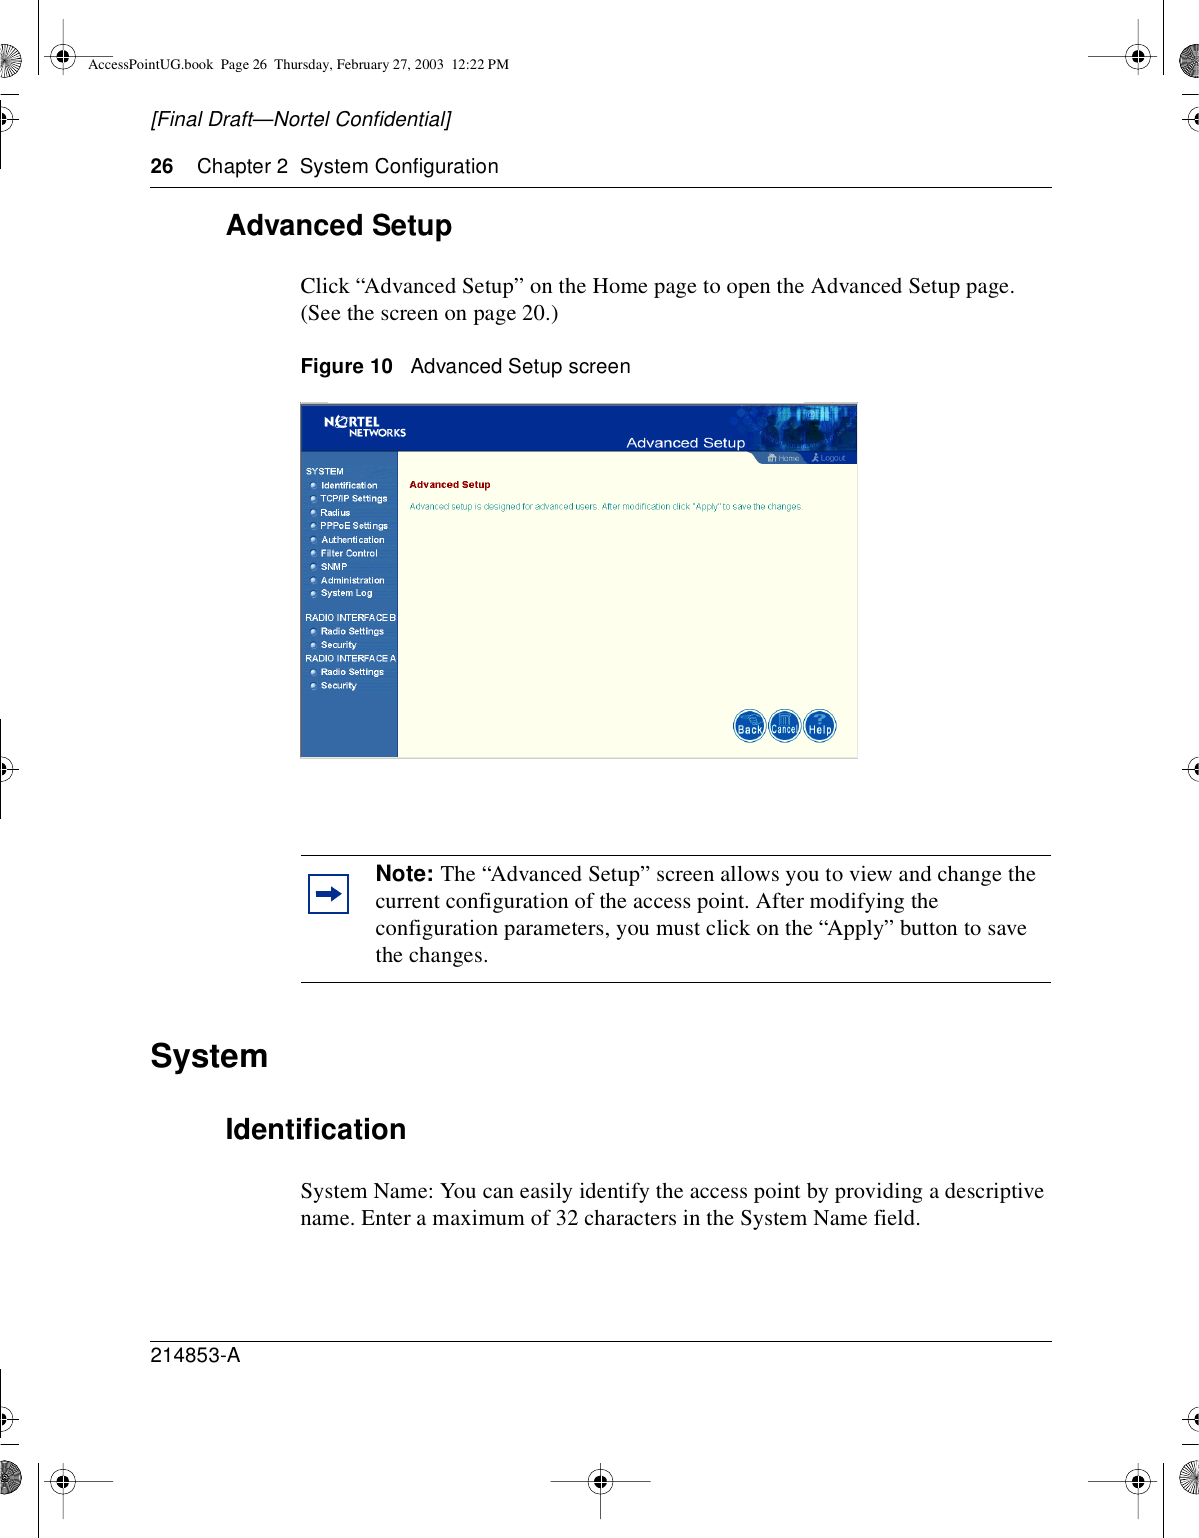 26 Chapter 2 System Configuration214853-A[Final Draft—Nortel Confidential]Advanced SetupClick “Advanced Setup” on the Home page to open the Advanced Setup page.(See the screen on page 20.)Figure 10 Advanced Setup screenSystemIdentificationSystem Name: You can easily identify the access point by providing a descriptivename. Enter a maximum of 32 characters in the System Name field.Note: The “Advanced Setup” screen allows you to view and change thecurrent configuration of the access point. After modifying theconfiguration parameters, you must click on the “Apply” button to savethe changes.AccessPointUG.book Page 26 Thursday, February 27, 2003 12:22 PM